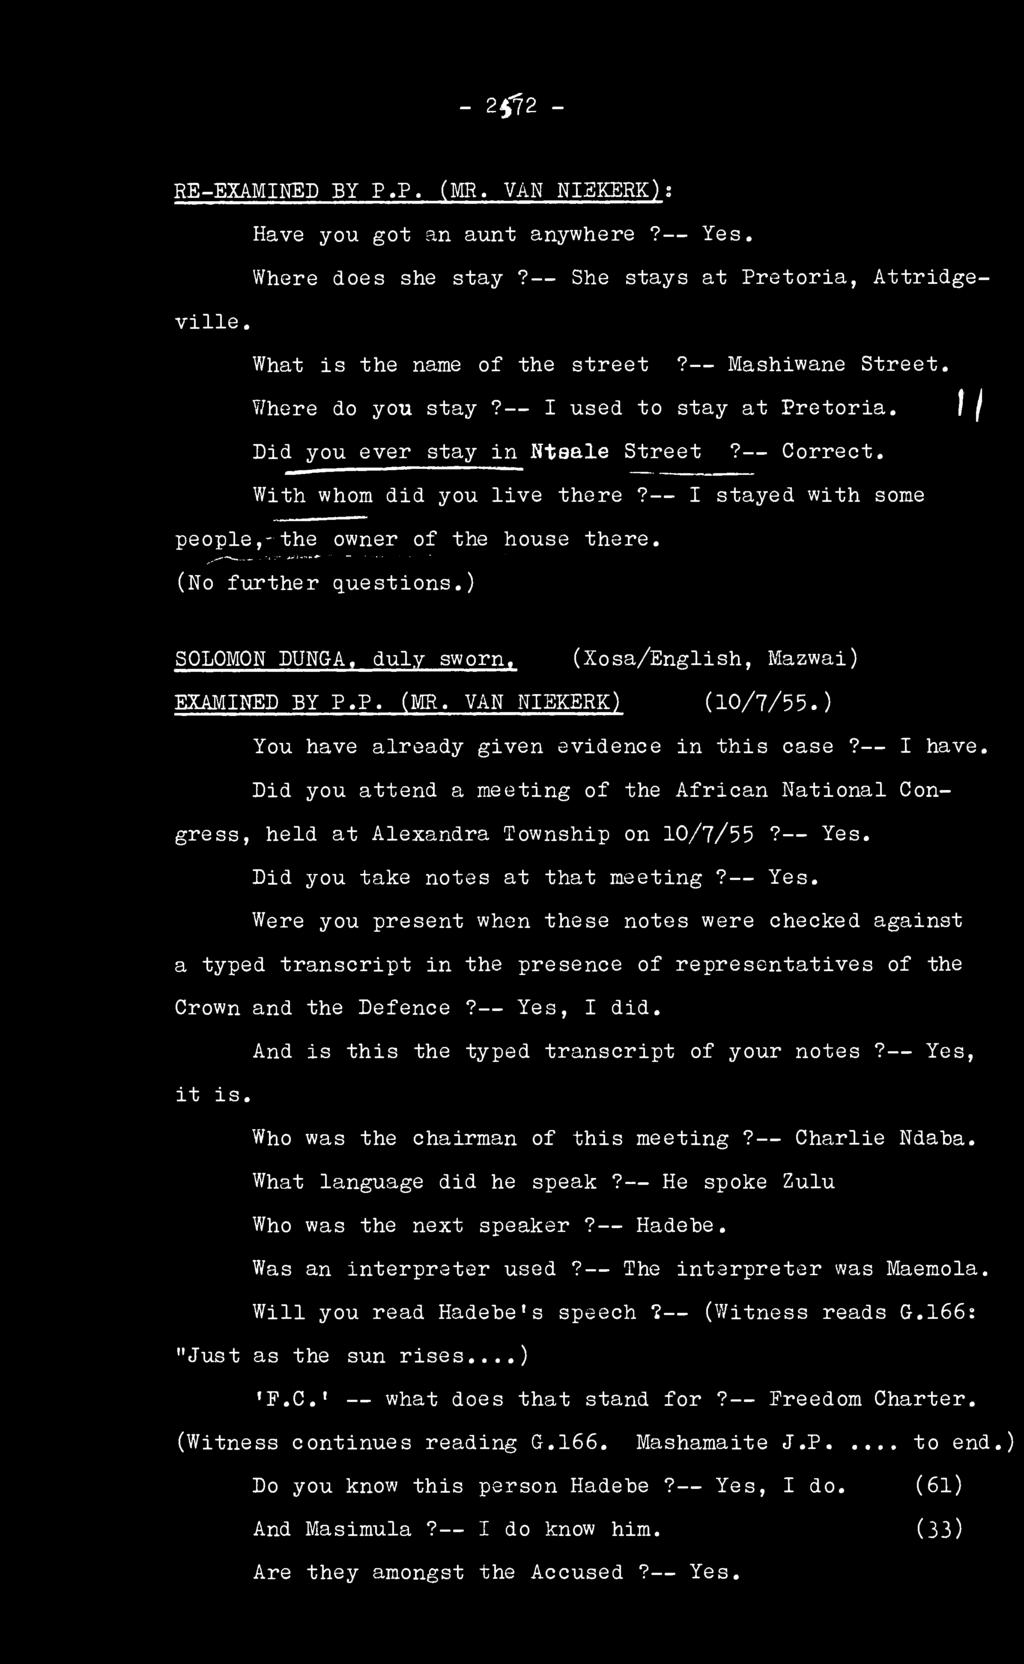 ^ i -- (No further questions.)! j SOLOMON DUNGA, duly sworn, (Xosa/English, Mazwai) EXAMINED BY P.P. (MR. VAN NIEKERK) (10/7/55.) You have already given evidence in this case? I have.